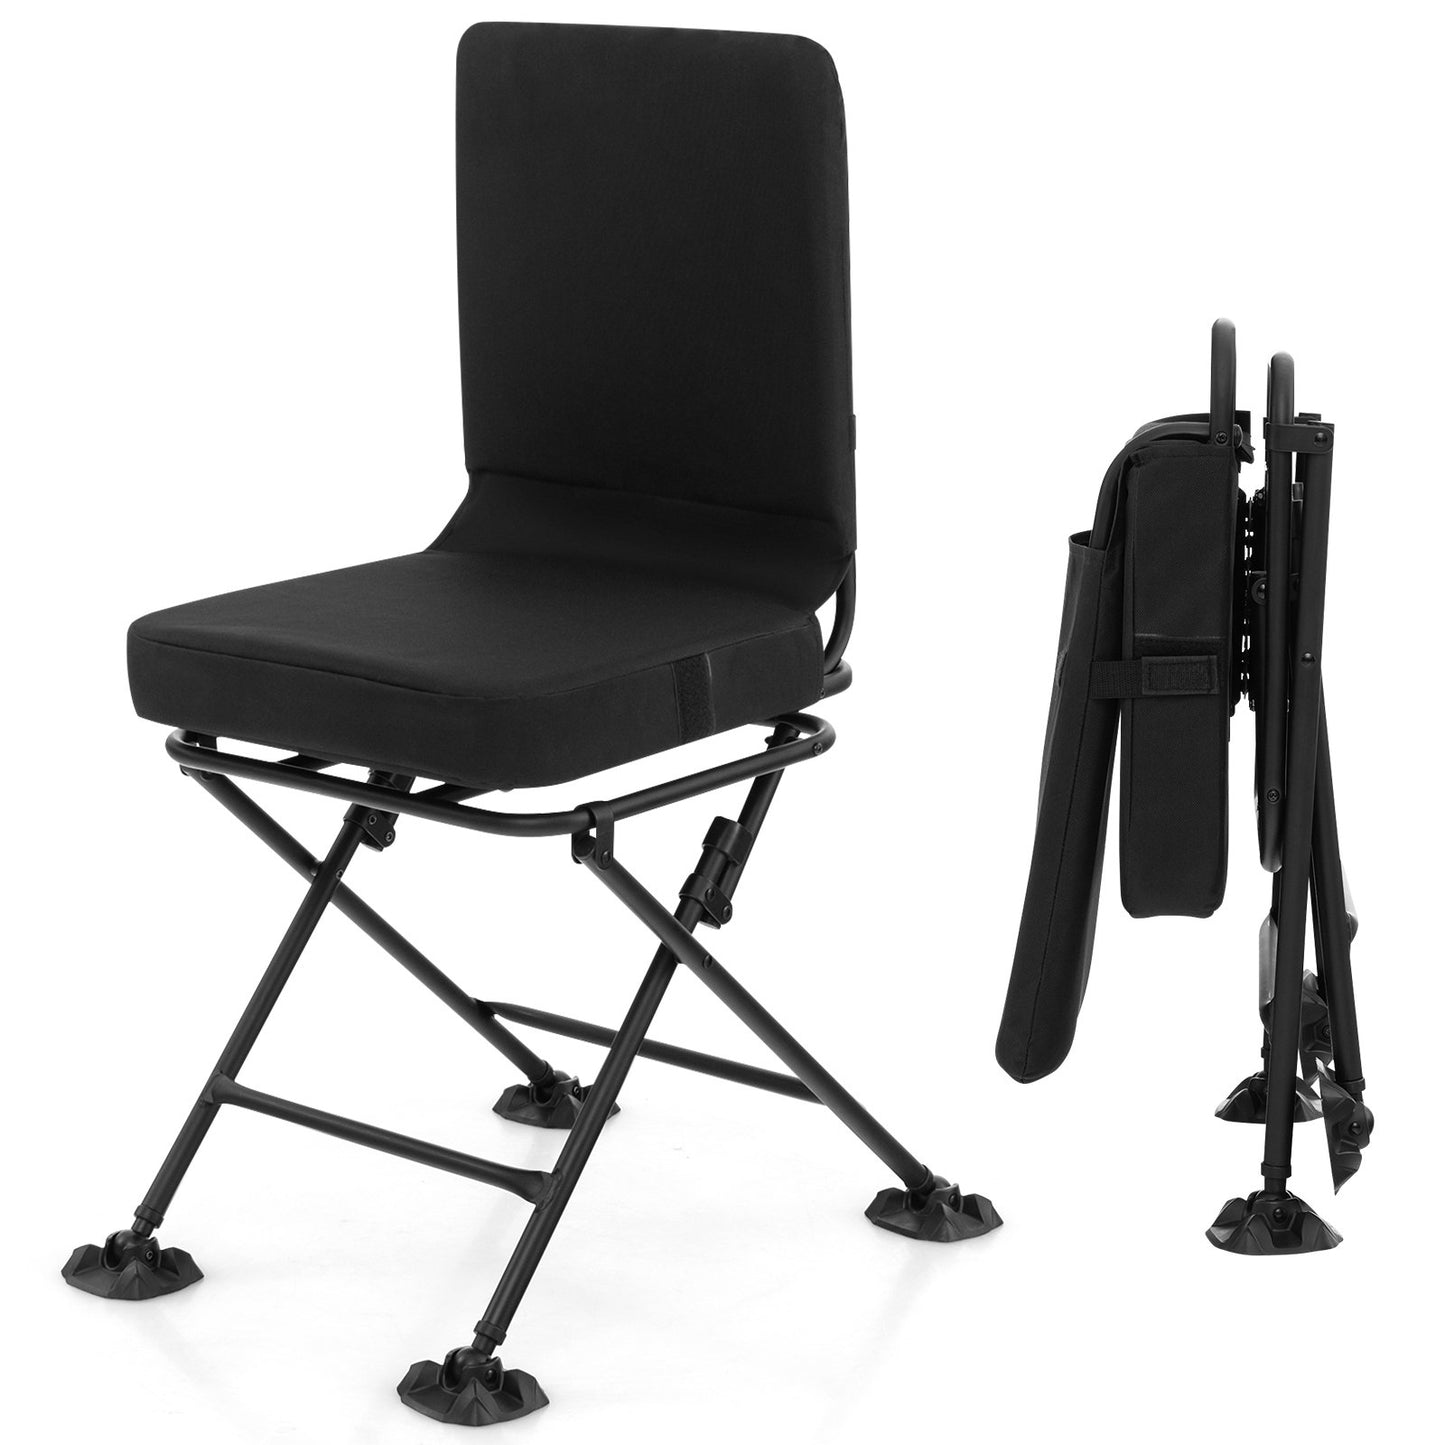 Swivel Folding Chair with Backrest and Padded Cushion, Black